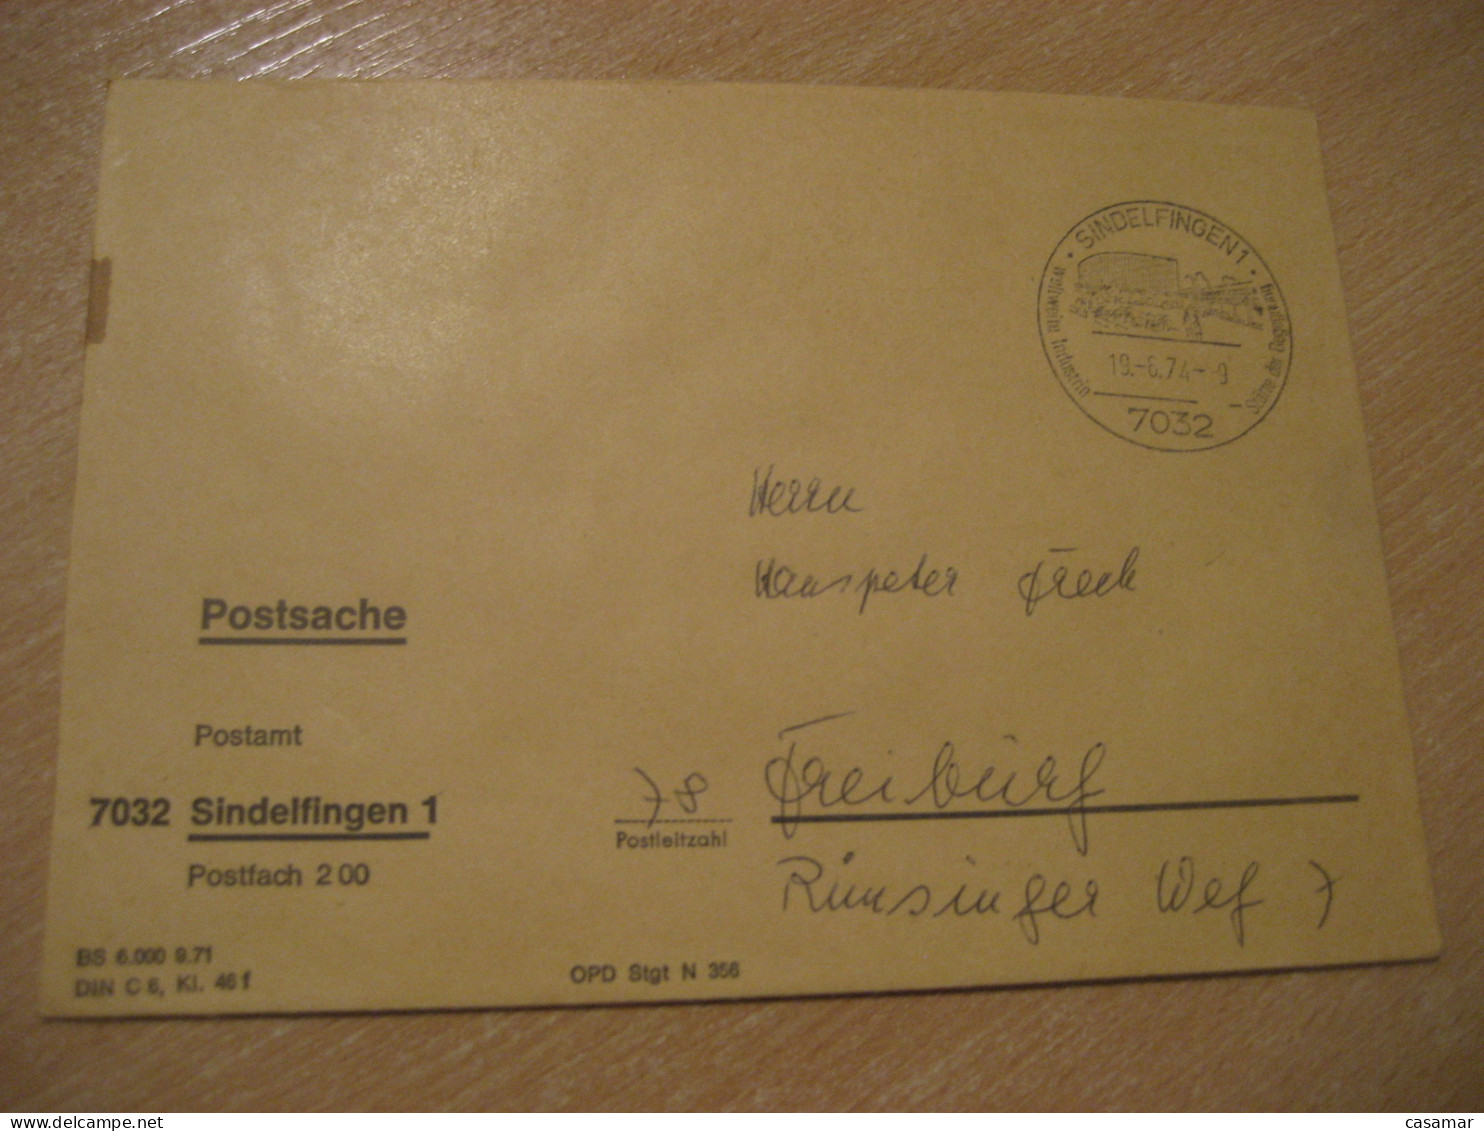 SINDELFINGEN 1974 To Freiburg Postage Paid Cancel Cover GERMANY - Covers & Documents